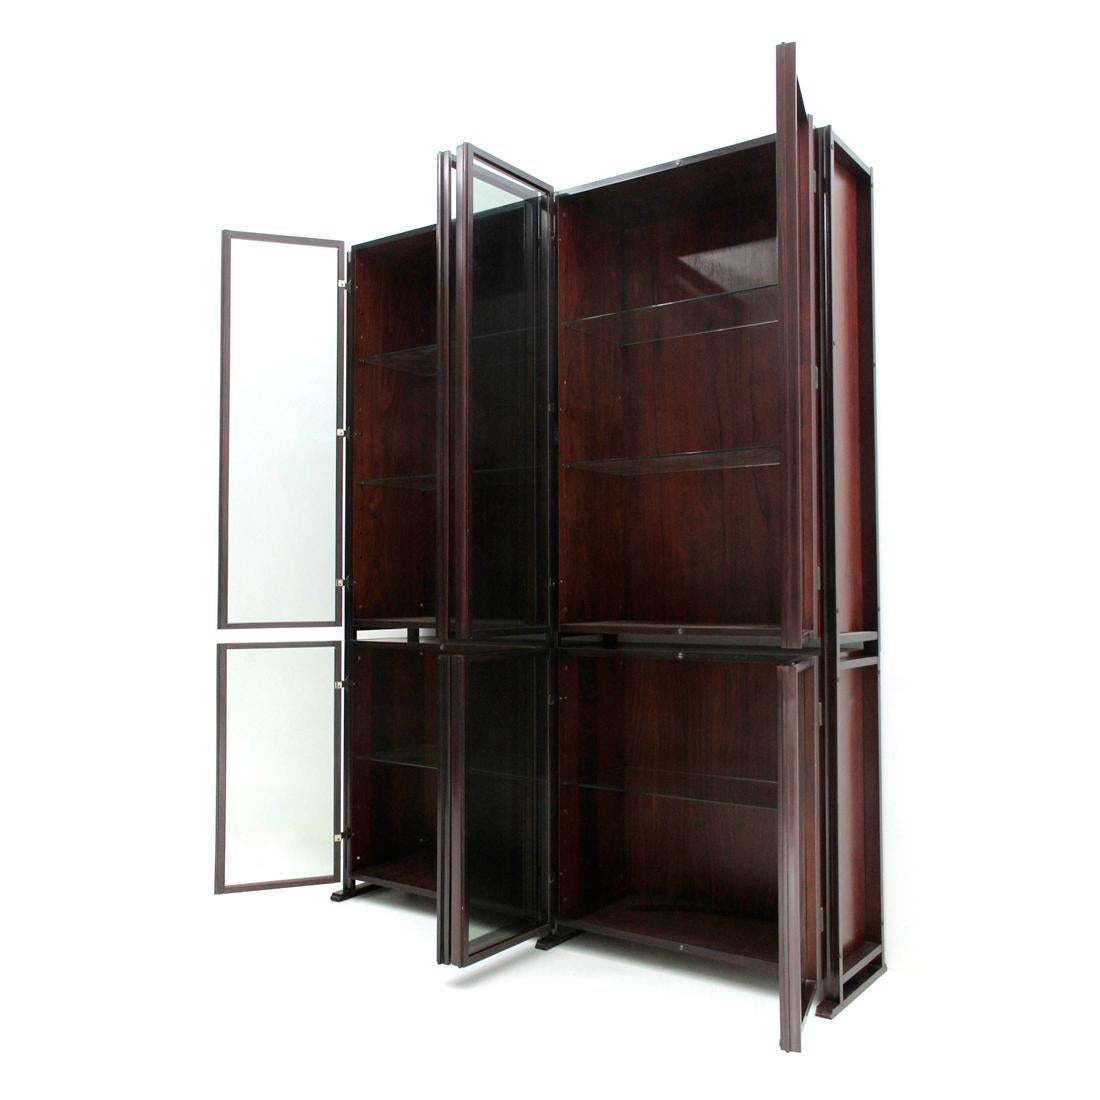 Mid-Century Modern Italian Midcentury Wall Unit by Gianni Songia for Sormani, 1960s